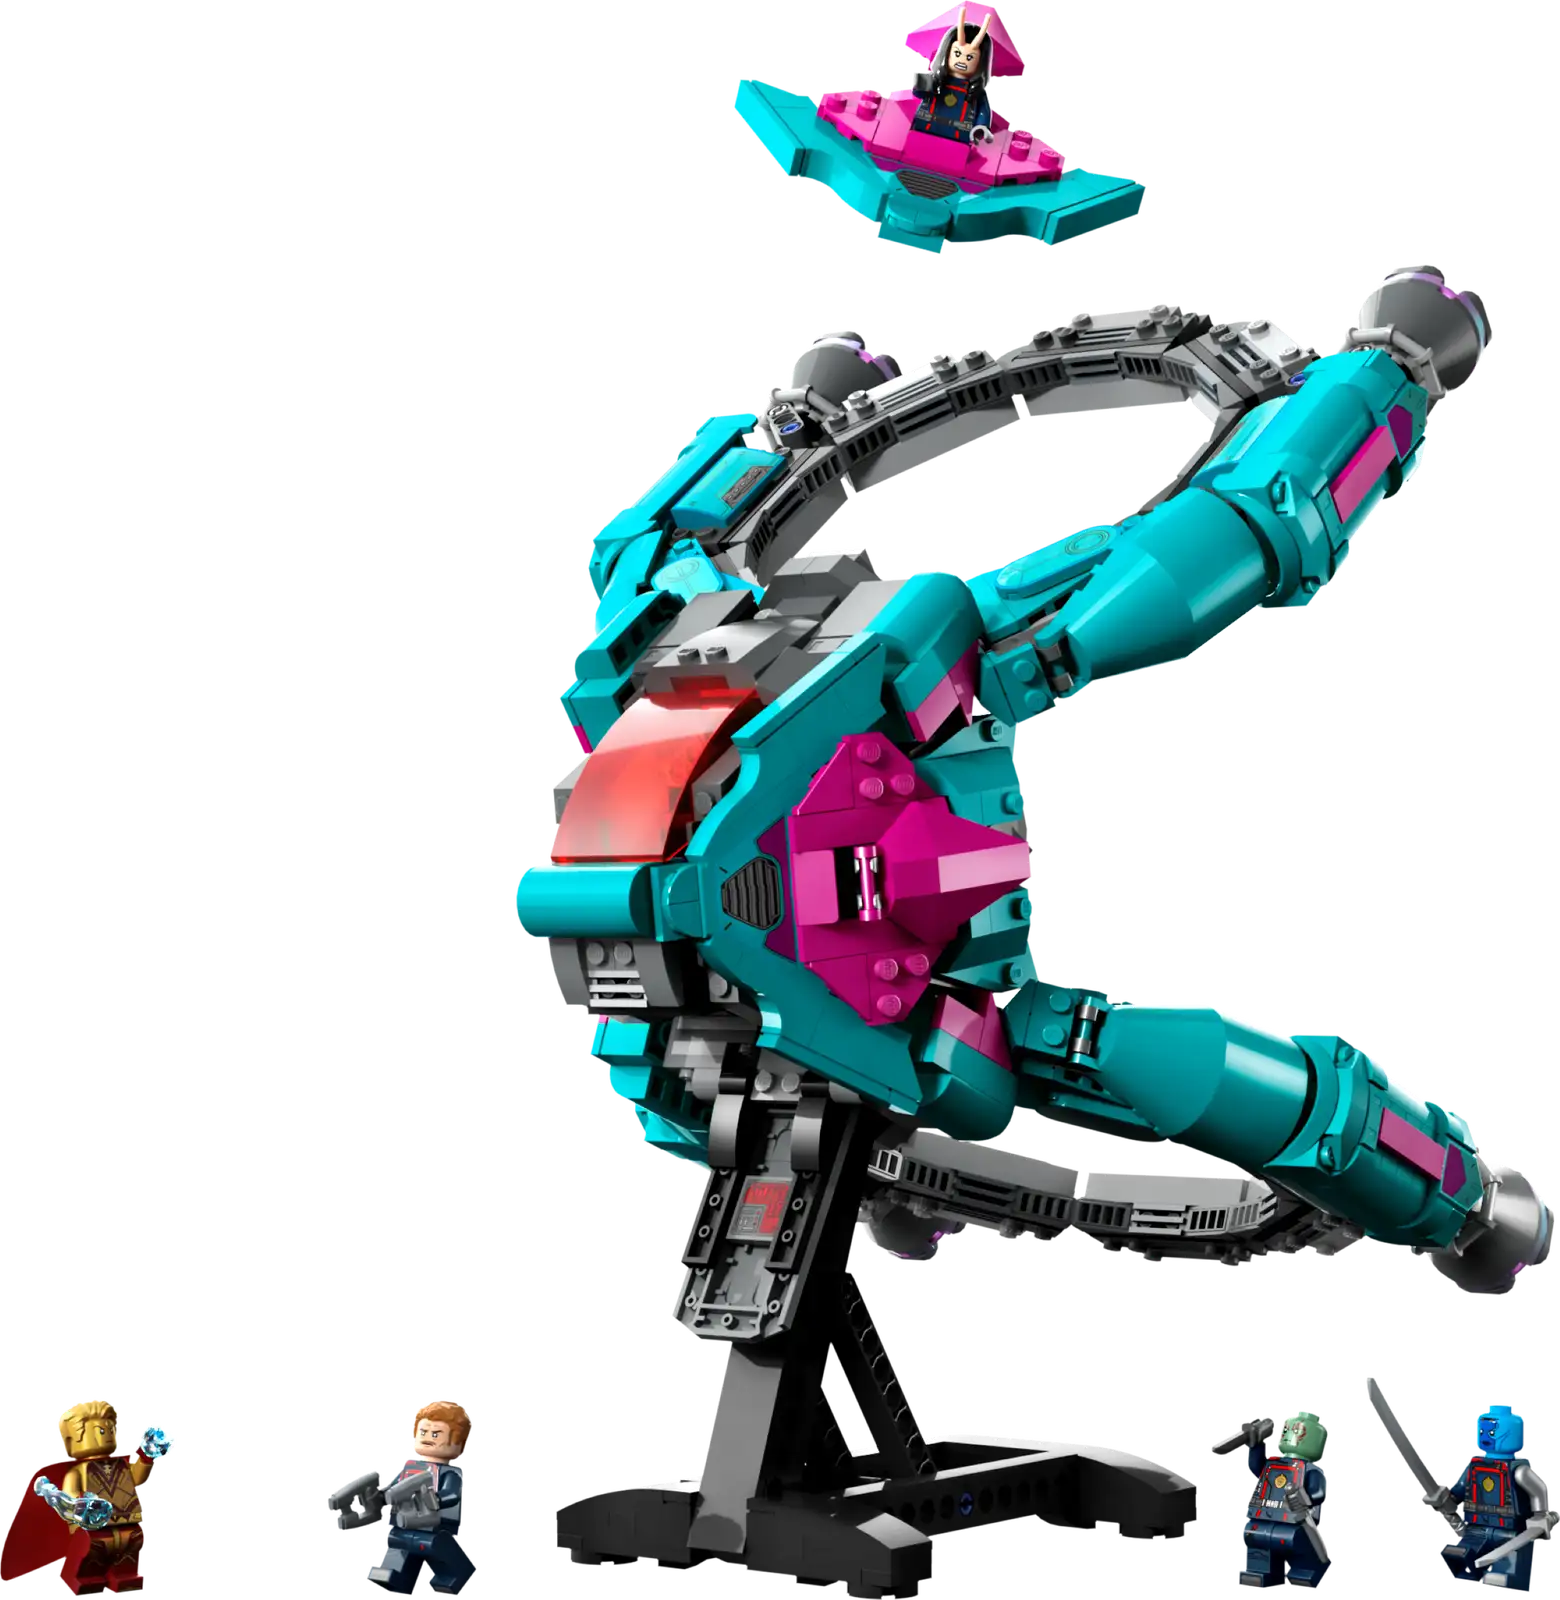 Lego Marvel The New Guardians' Ship 76255